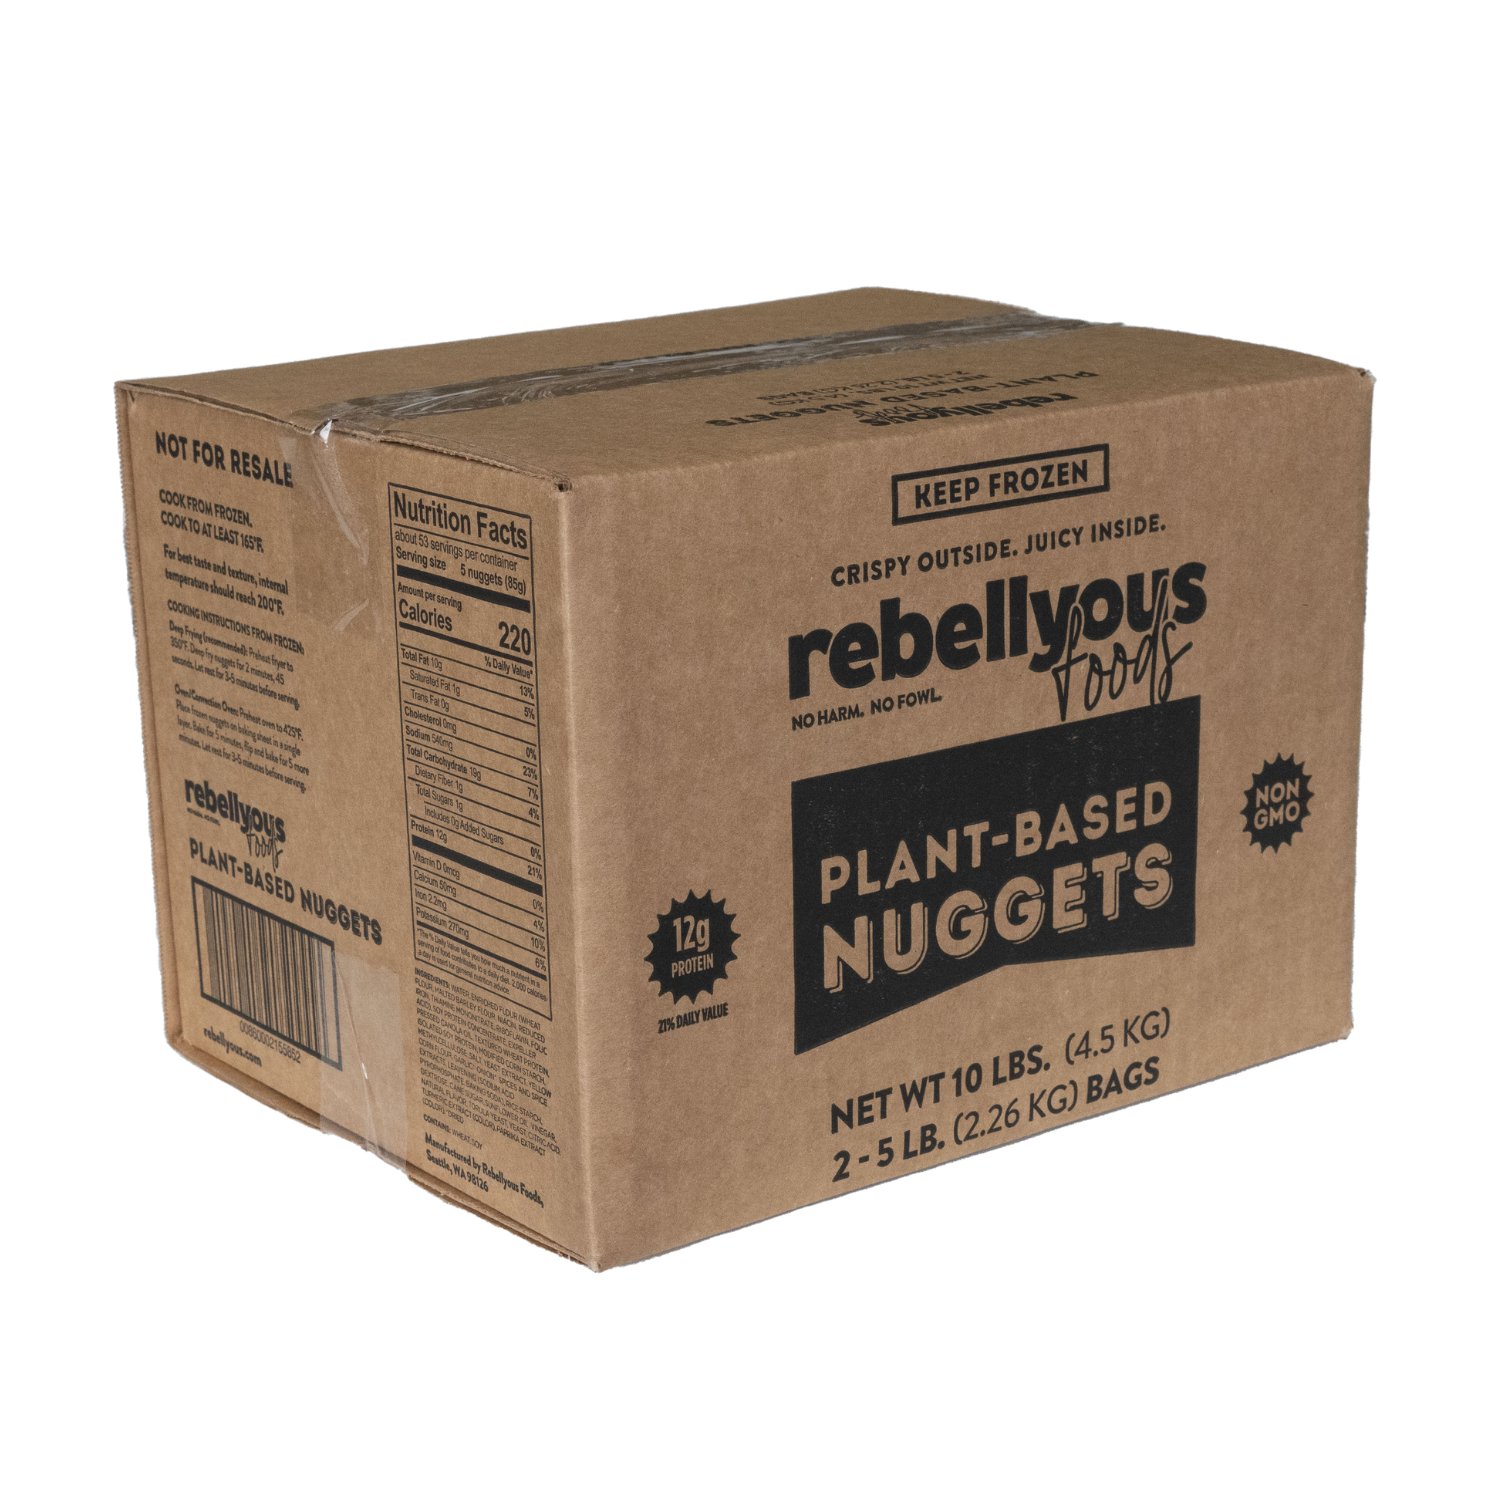 Rebellyous Nuggets (Soy + Wheat) Food Service  1 units per case 10.0 lbs